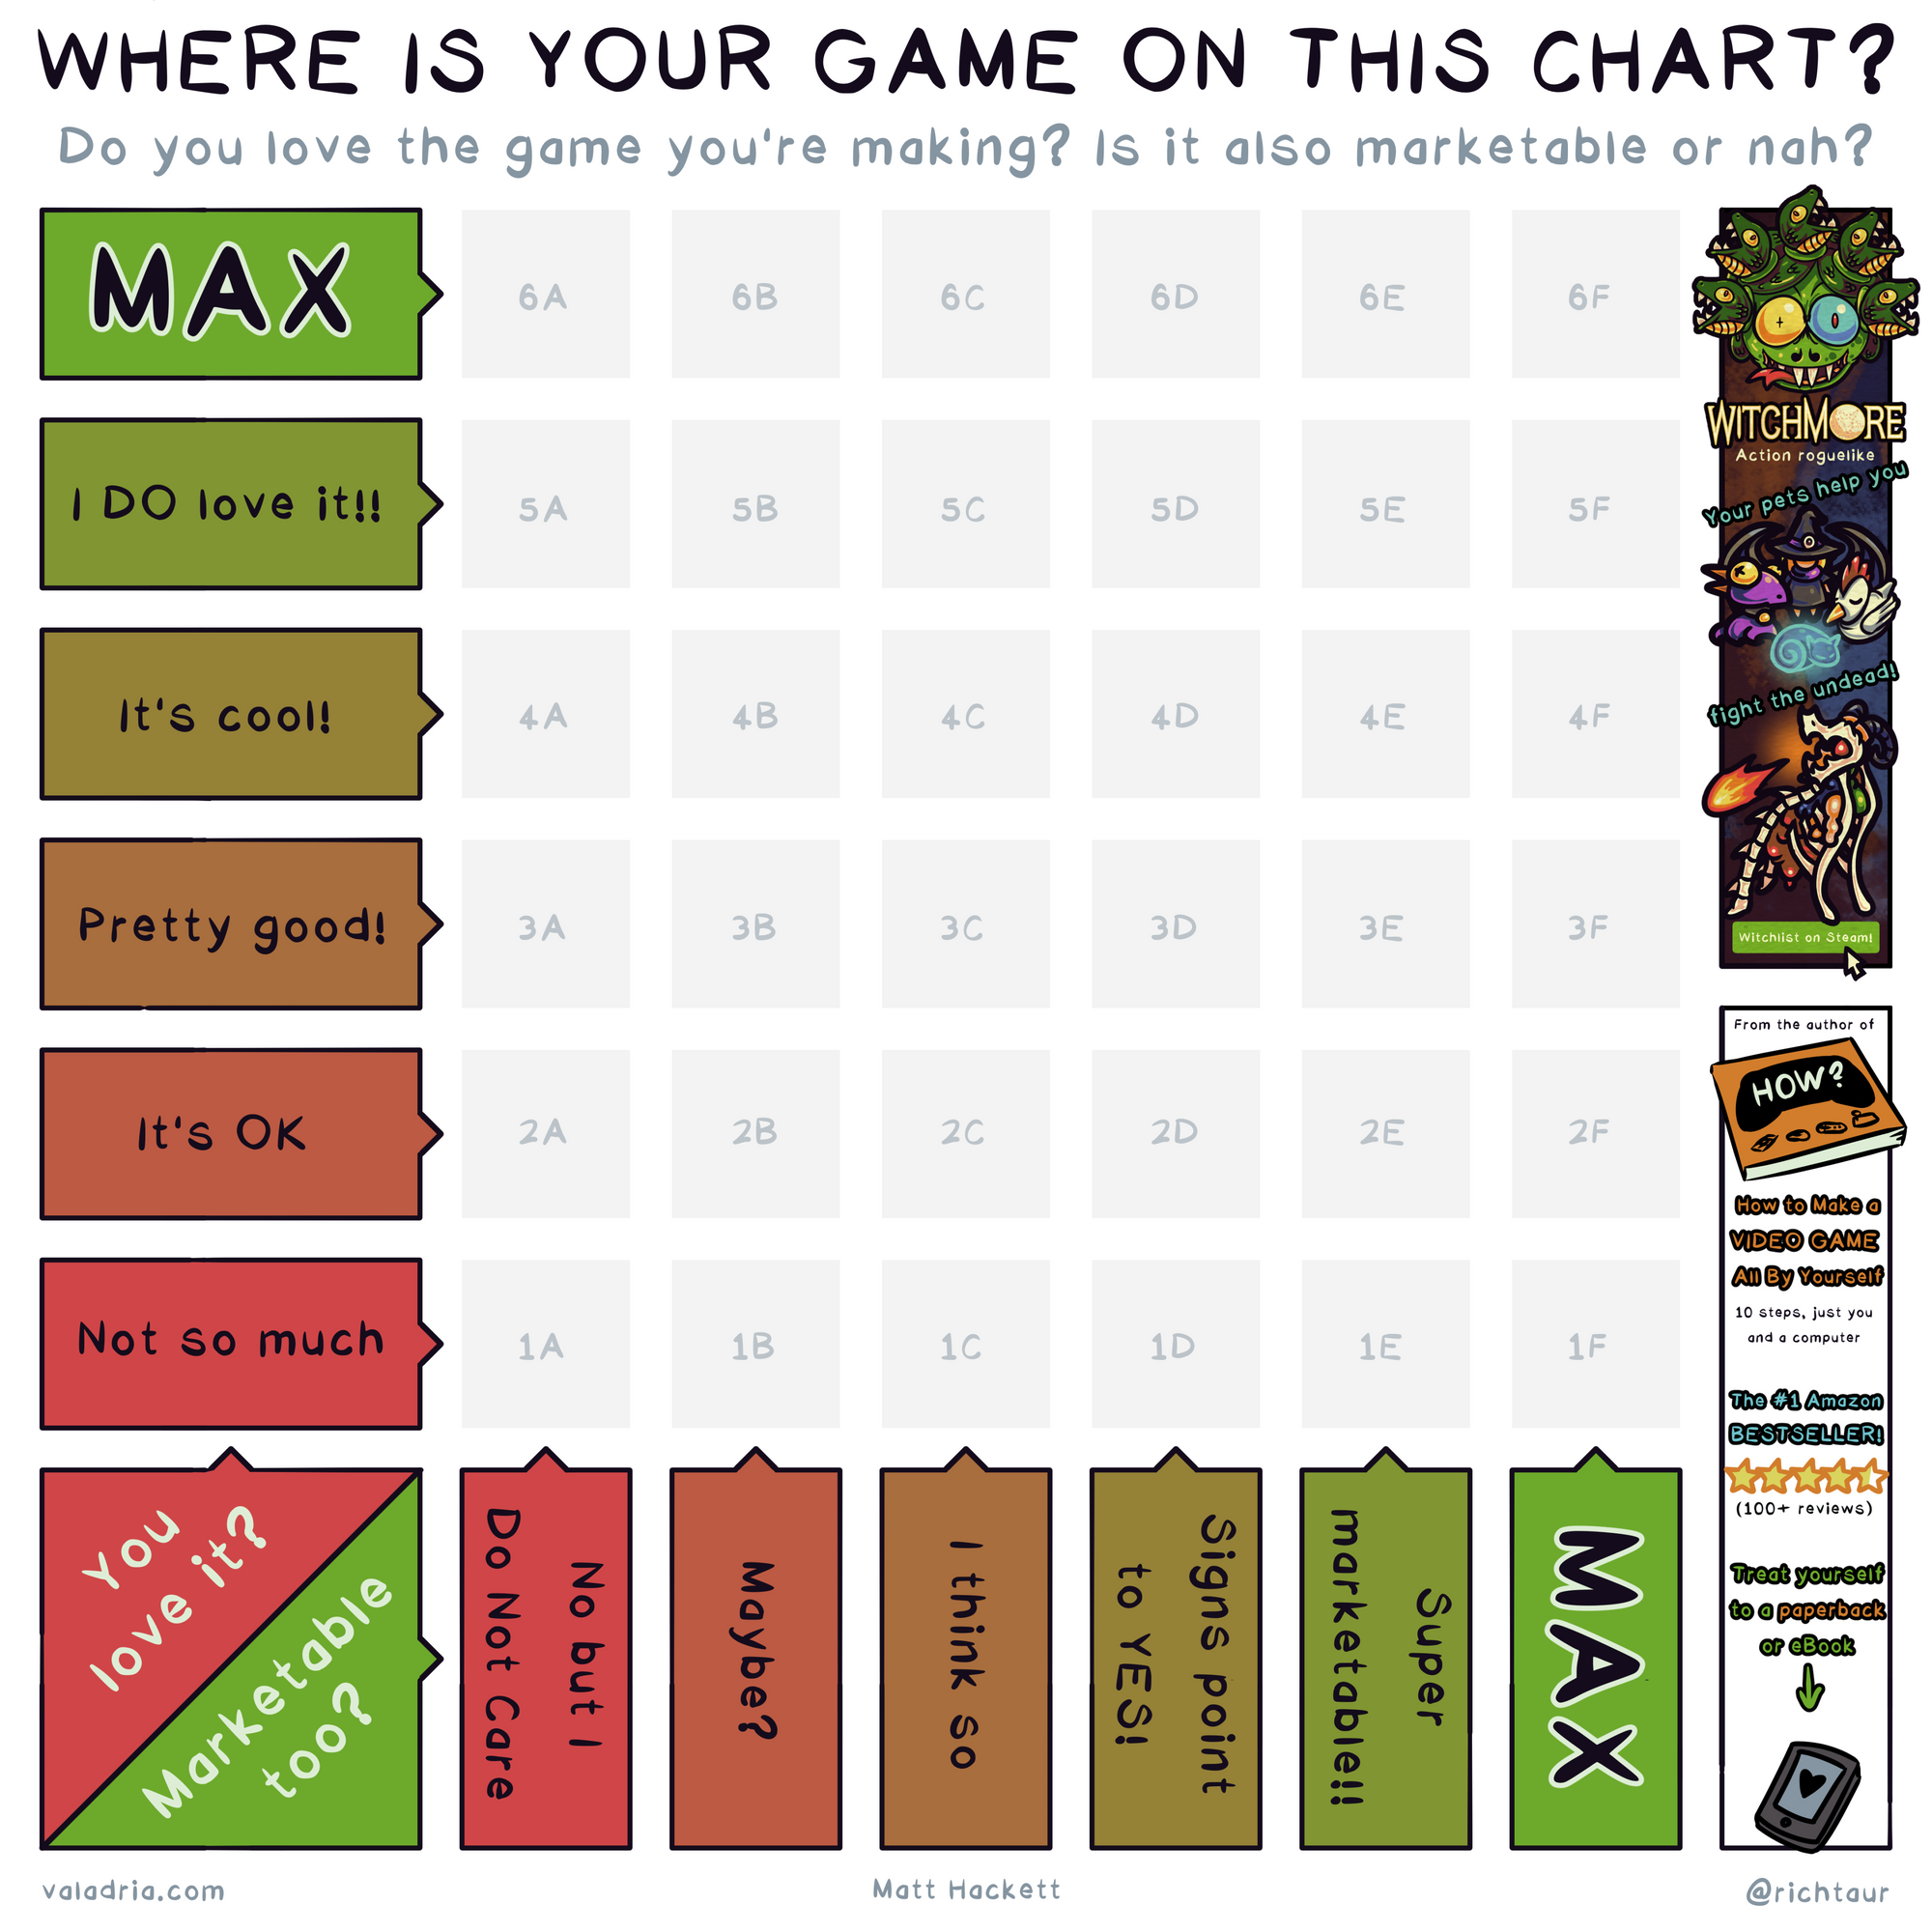 WHERE IS YOUR GAME ON THIS CHART? Do you love the game you're making? Is it also marketable or nah? You love it? MAX I DO love it!! It's cool! Pretty good! It's OK Not so much Marketable too? MAX Super marketable!! Signs point to YES! I think So Maybe? No but I Do Not Care From the author of How to Make a Video Game All By Yourself valadria.com @richtaur